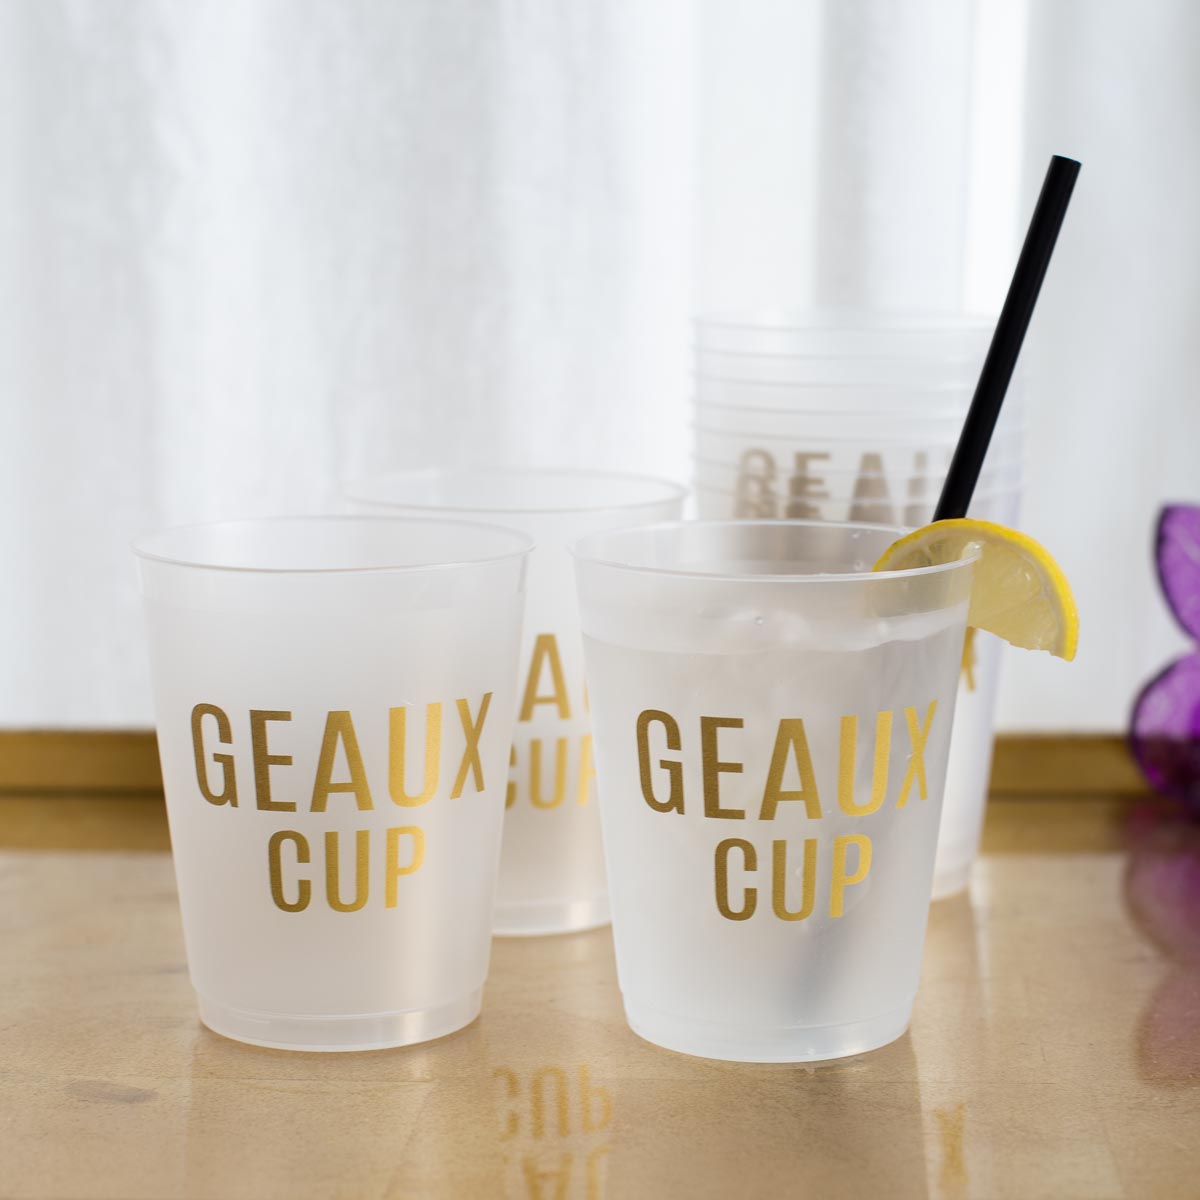 Geaux Cup Party Cups (Set of 10)